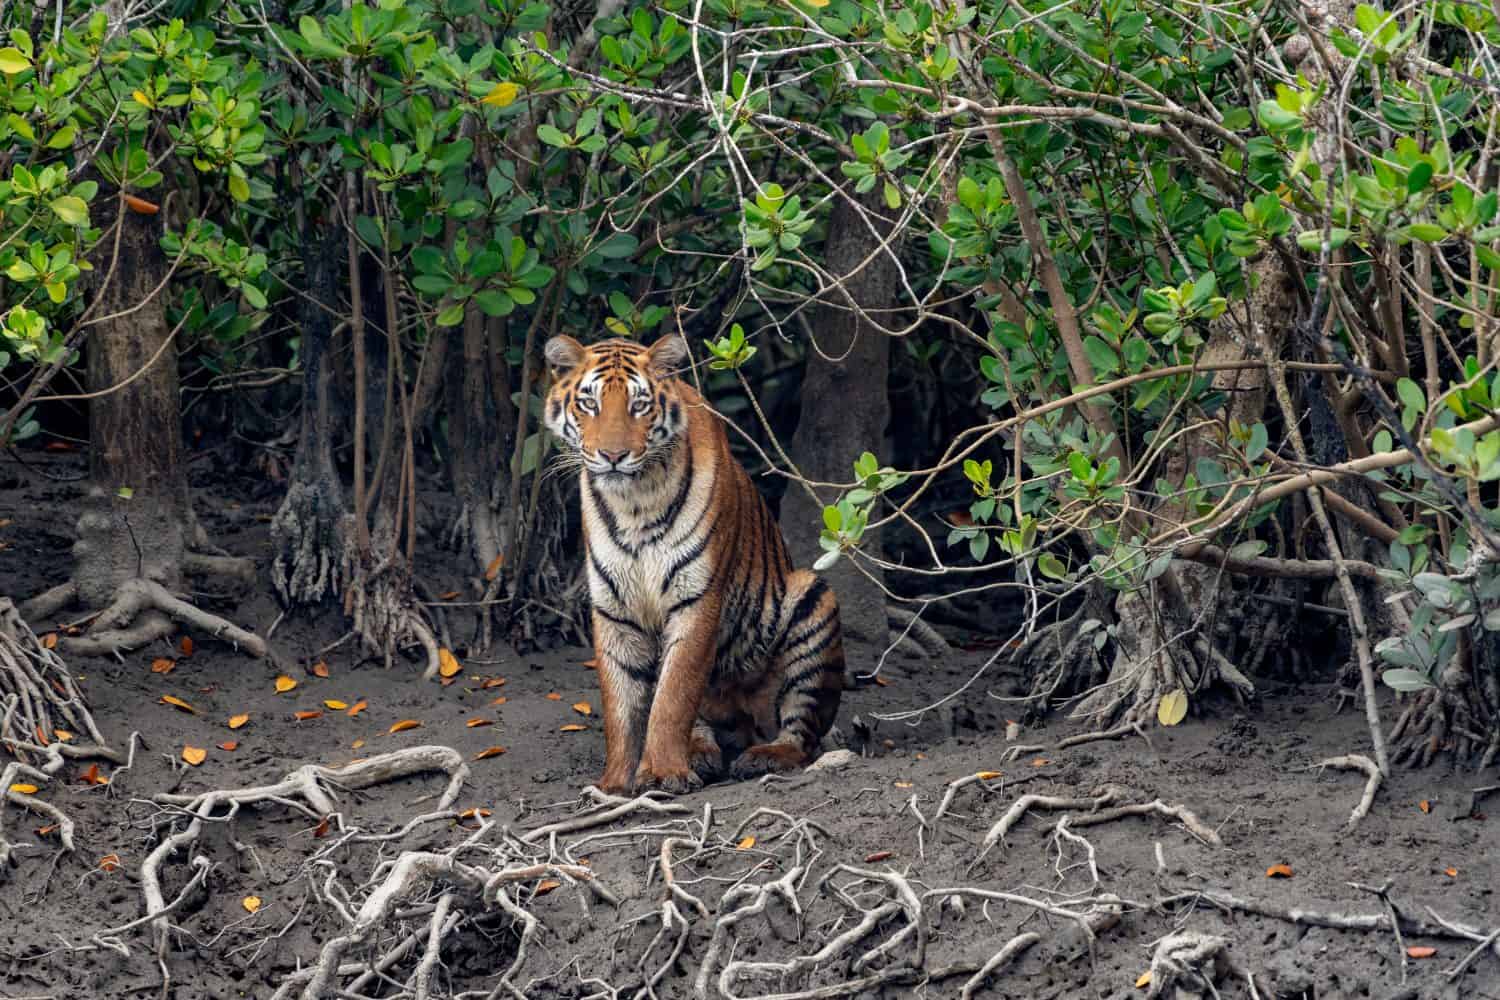 <ul> <li><strong>Location:</strong> Bangladesh</li> <li><strong>Known For:</strong> Being a biodiverse forest and home to the royal Bengal tiger</li> </ul> <p>Nature lovers enjoy visiting the Sundarbans Reserve Forest. However, the rising sea is a significant contributing factor to the disappearance of the Sundarbans. <a href="https://zerocarbon-analytics.org/archives/justice/loss-and-damage-in-the-sundarbans">Four islands</a> have completely disappeared under water: Suparibhanga, Kabasgadi, Bedford, and Lohachara, which led to the displacement of 6,000 families. Deforestation and pollution also contribute to the disappearance of the Sundarbans Forest.</p>